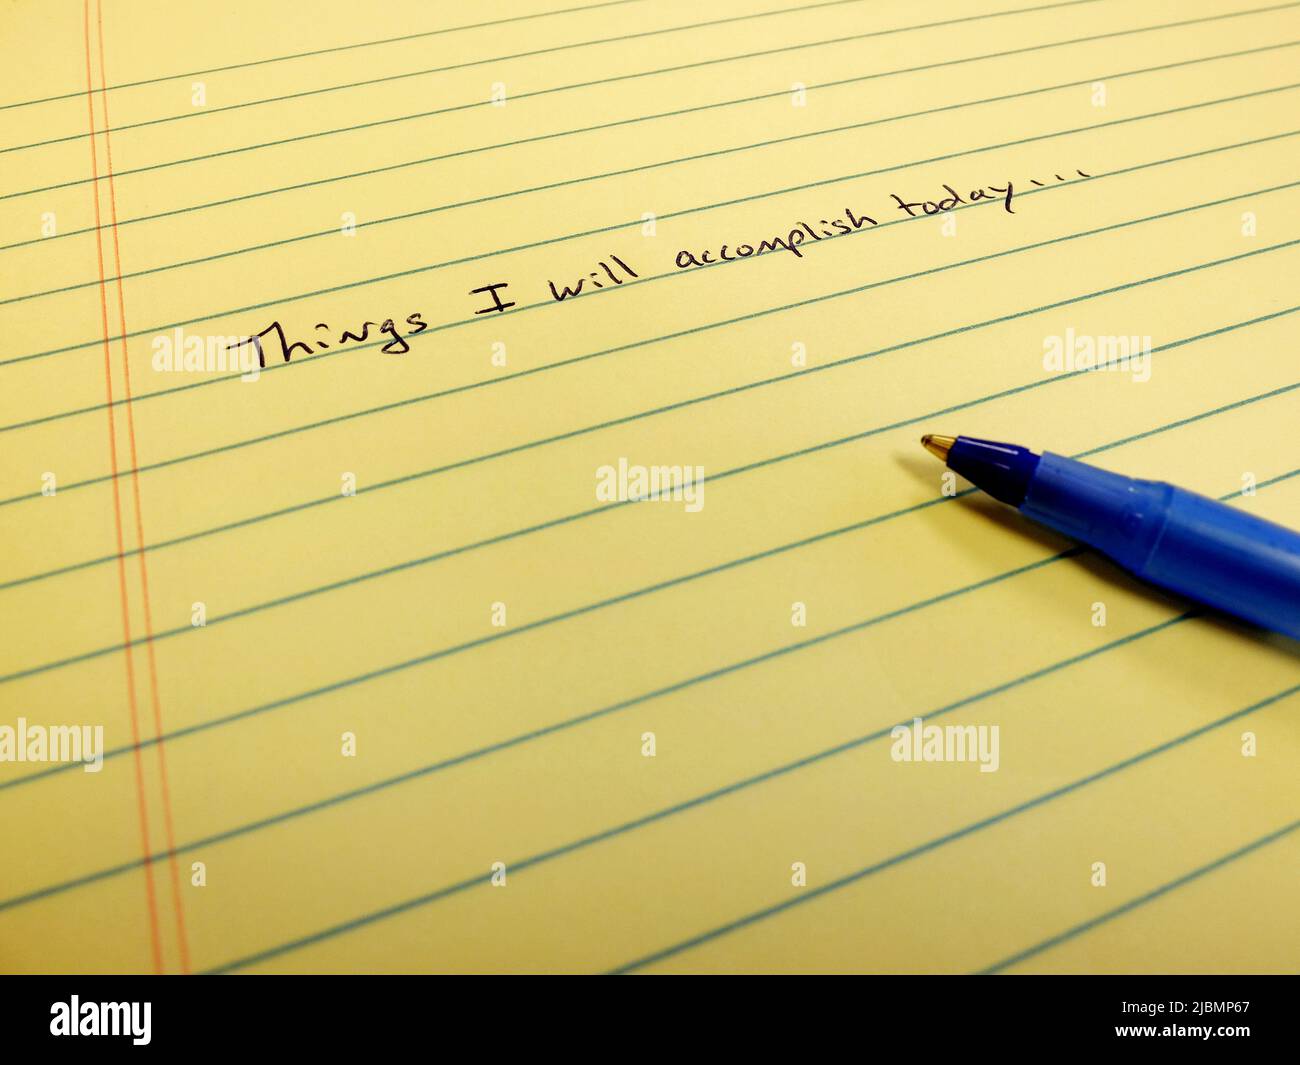 Note on paper things I will accomplish today written on notebook blue pen setting goals for self improvement Stock Photo